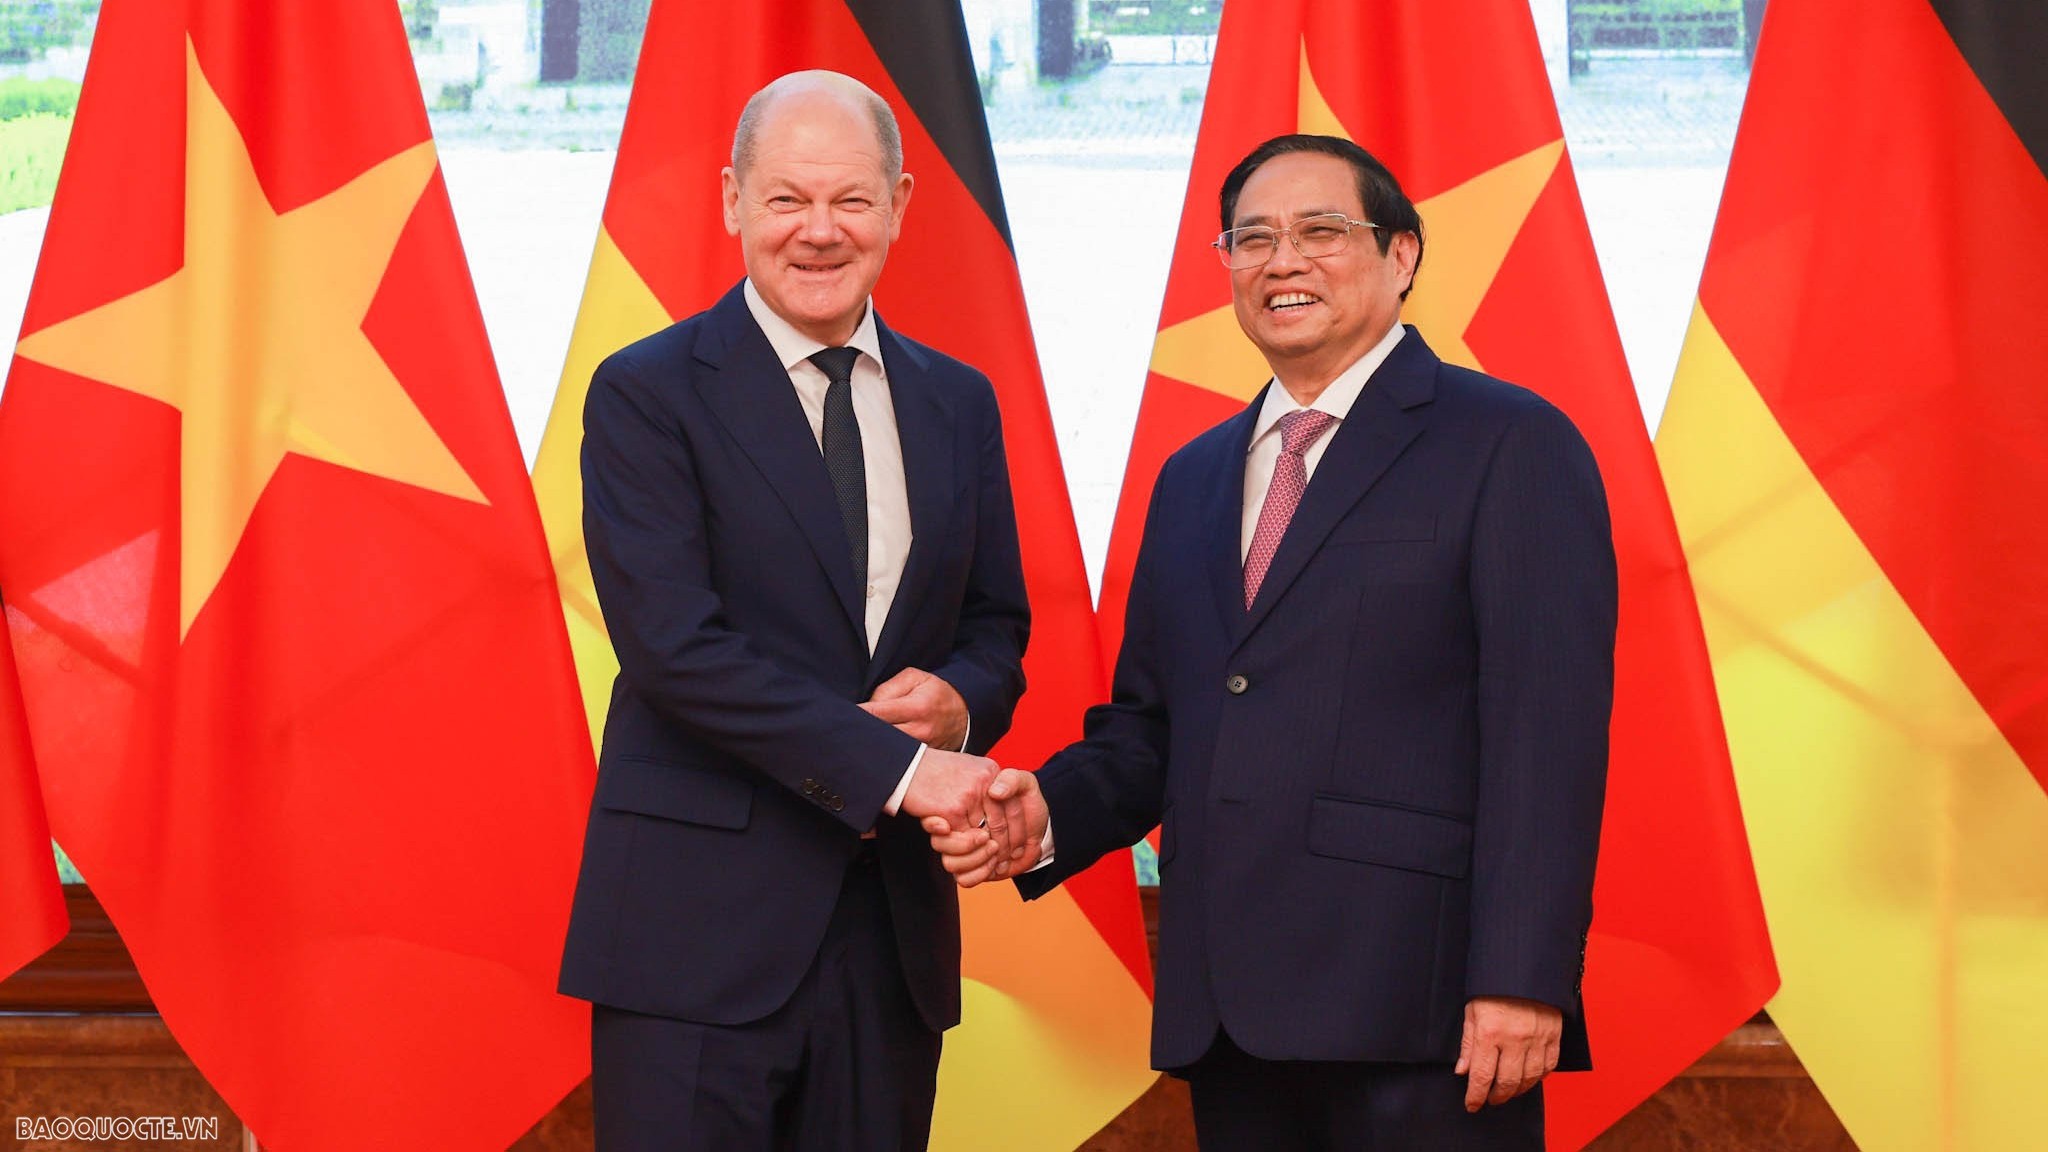 PM hosts official welcome ceremony for German Chancellor Olaf Scholz